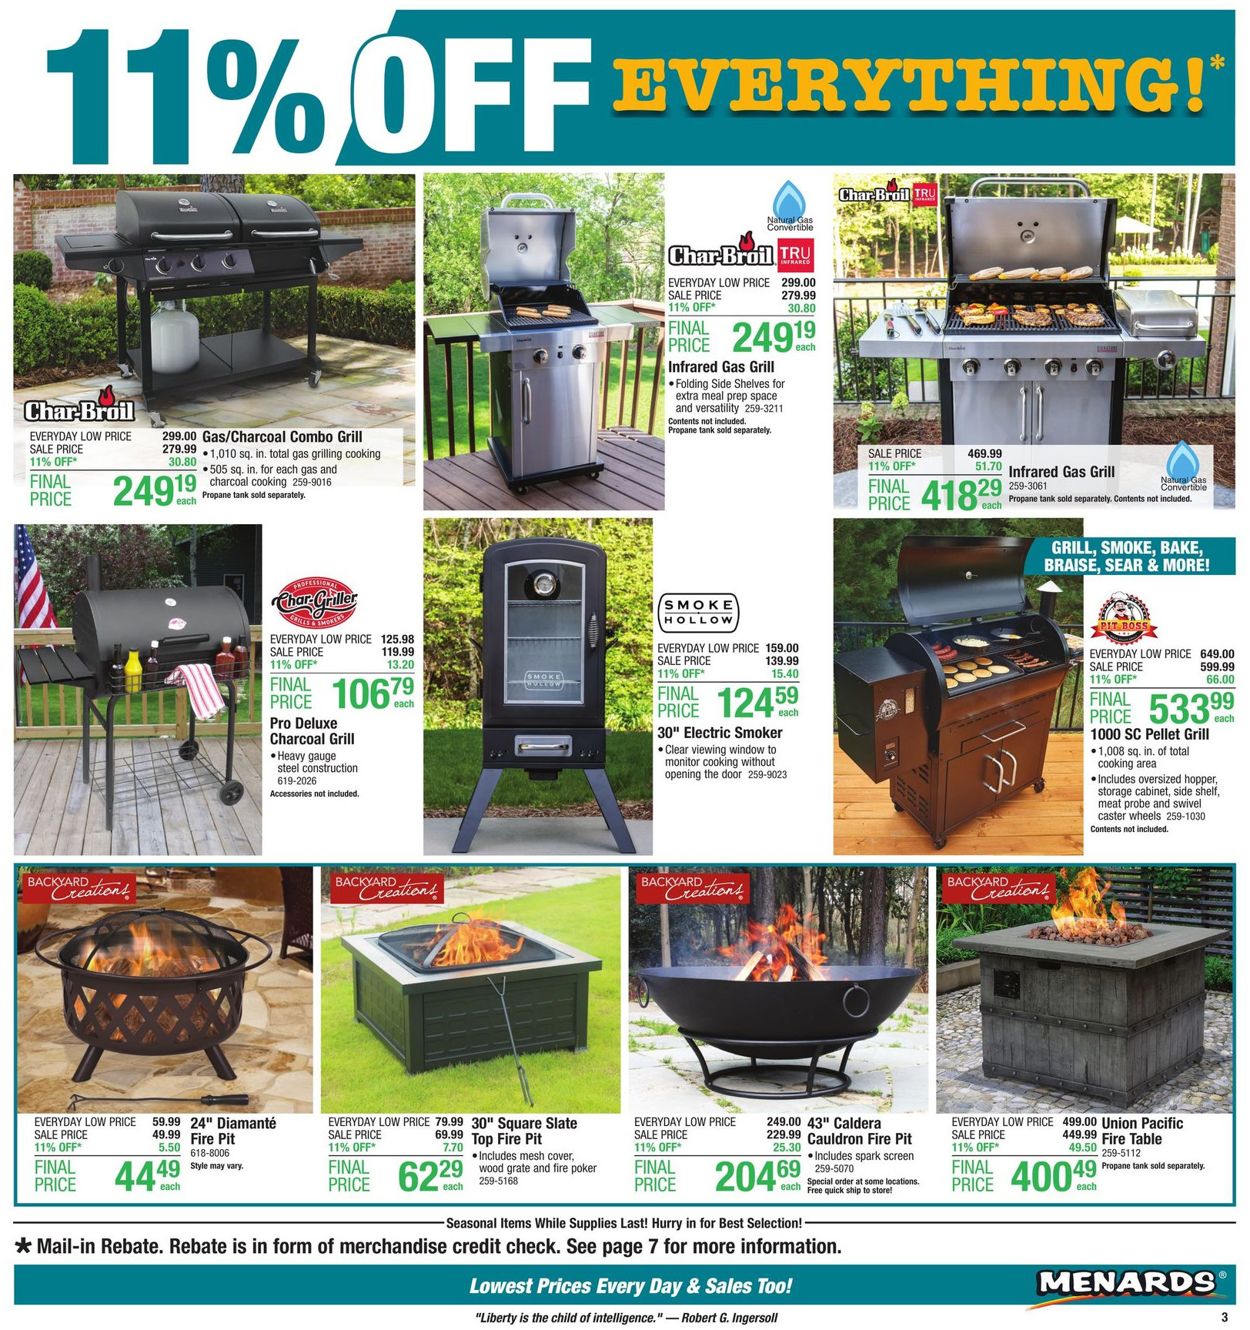 Menards Current weekly ad 06/16 - 06/22/2019 [4] - www.bagssaleusa.com/product-category/classic-bags/